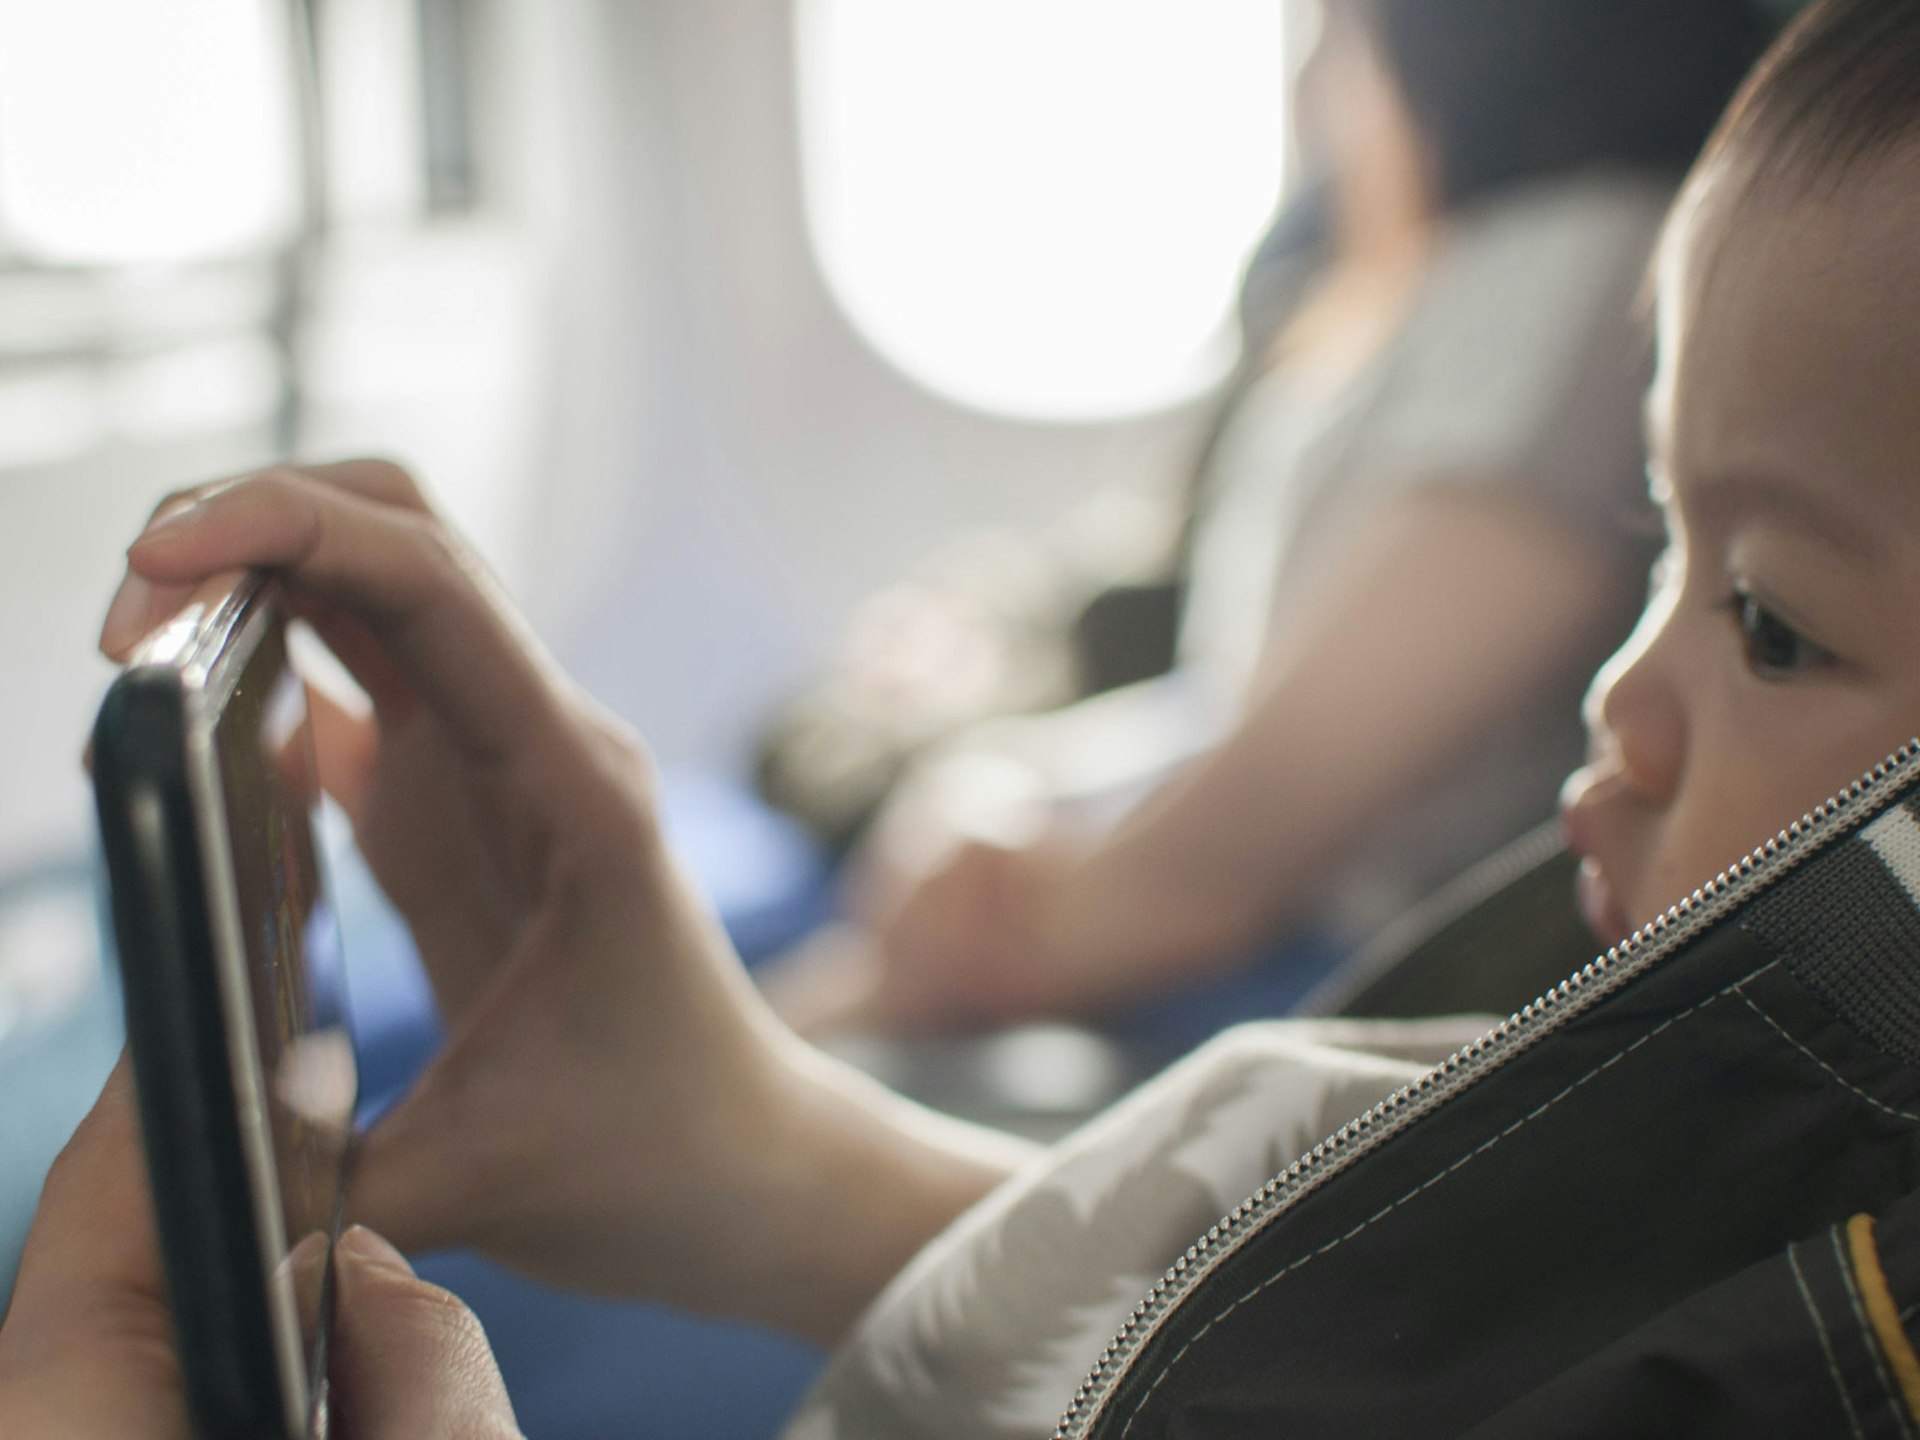 Child watching videos on a phone on a plane